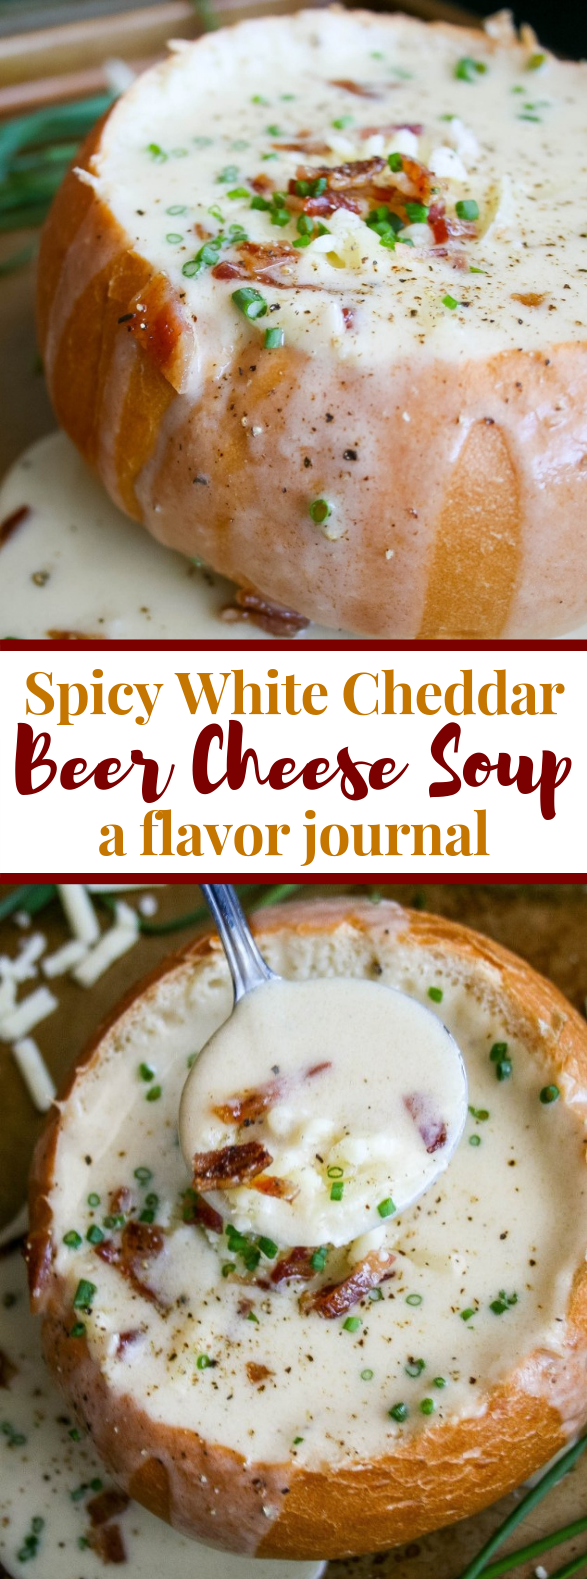 spicy white cheddar beer cheese soup #dinner #comfortfood